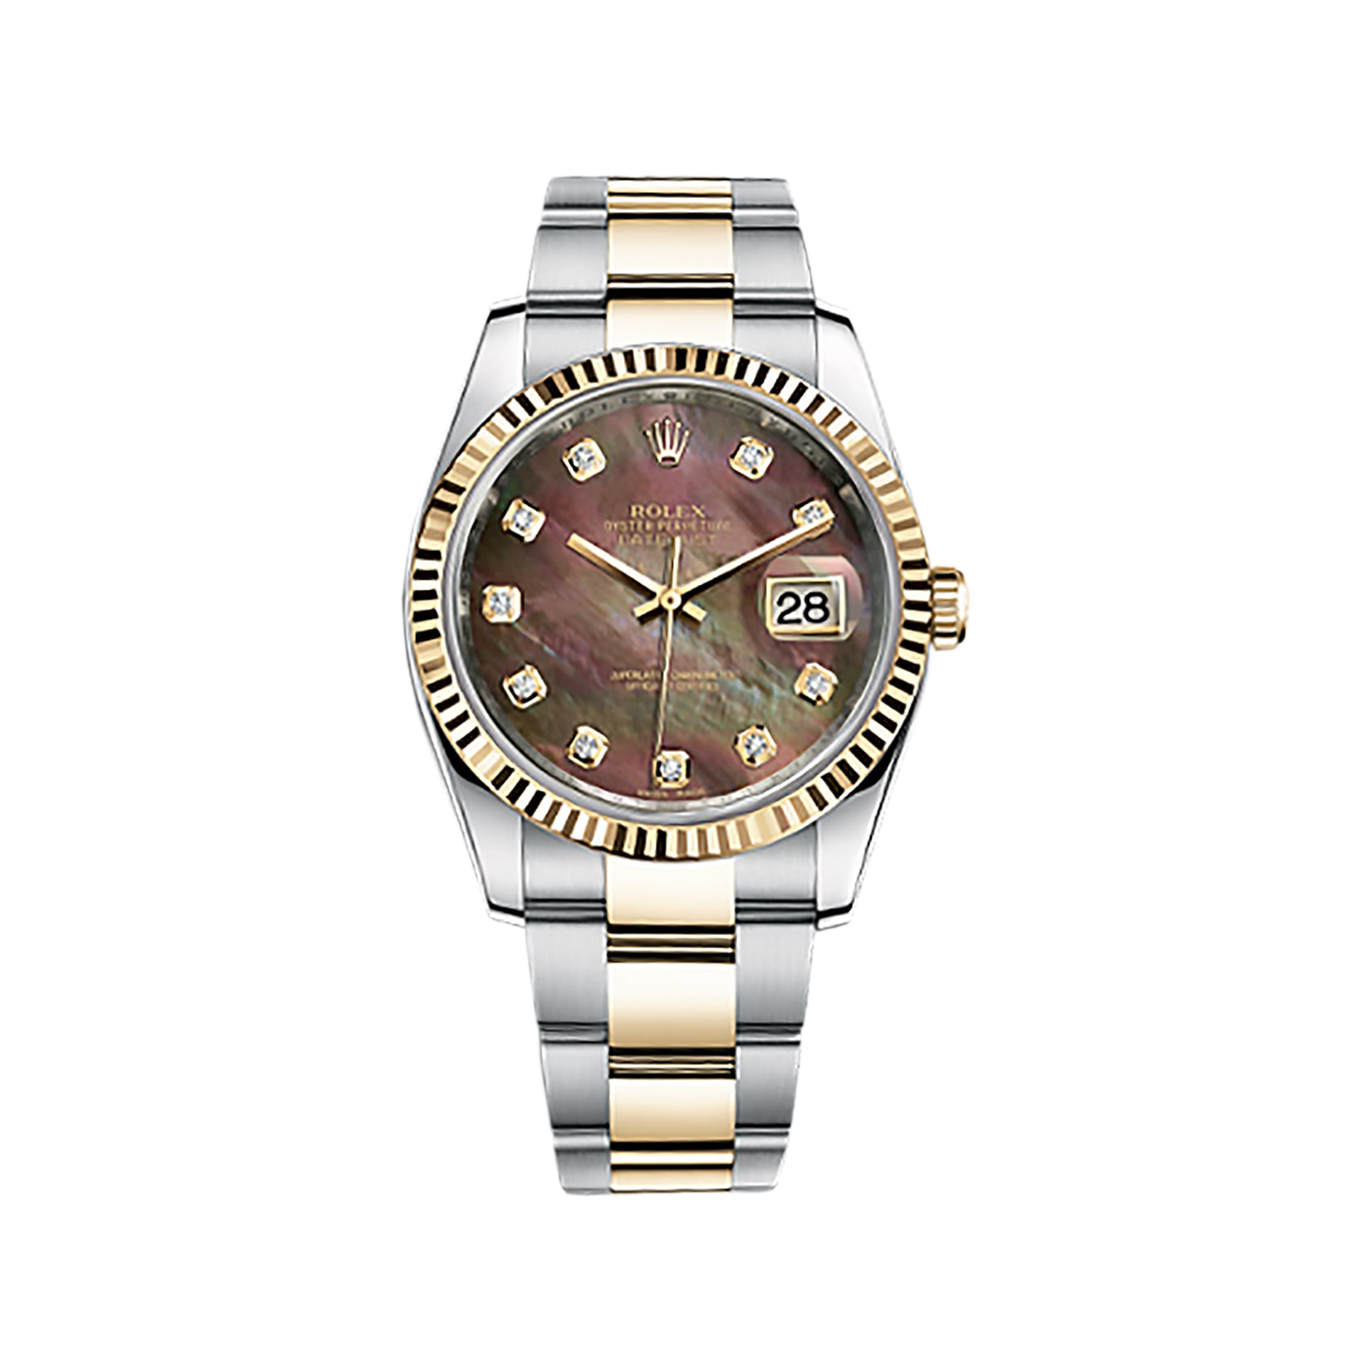 Datejust 36 116233 Gold & Stainless Steel Watch (Black Mother-of-Pearl Set with Diamonds)